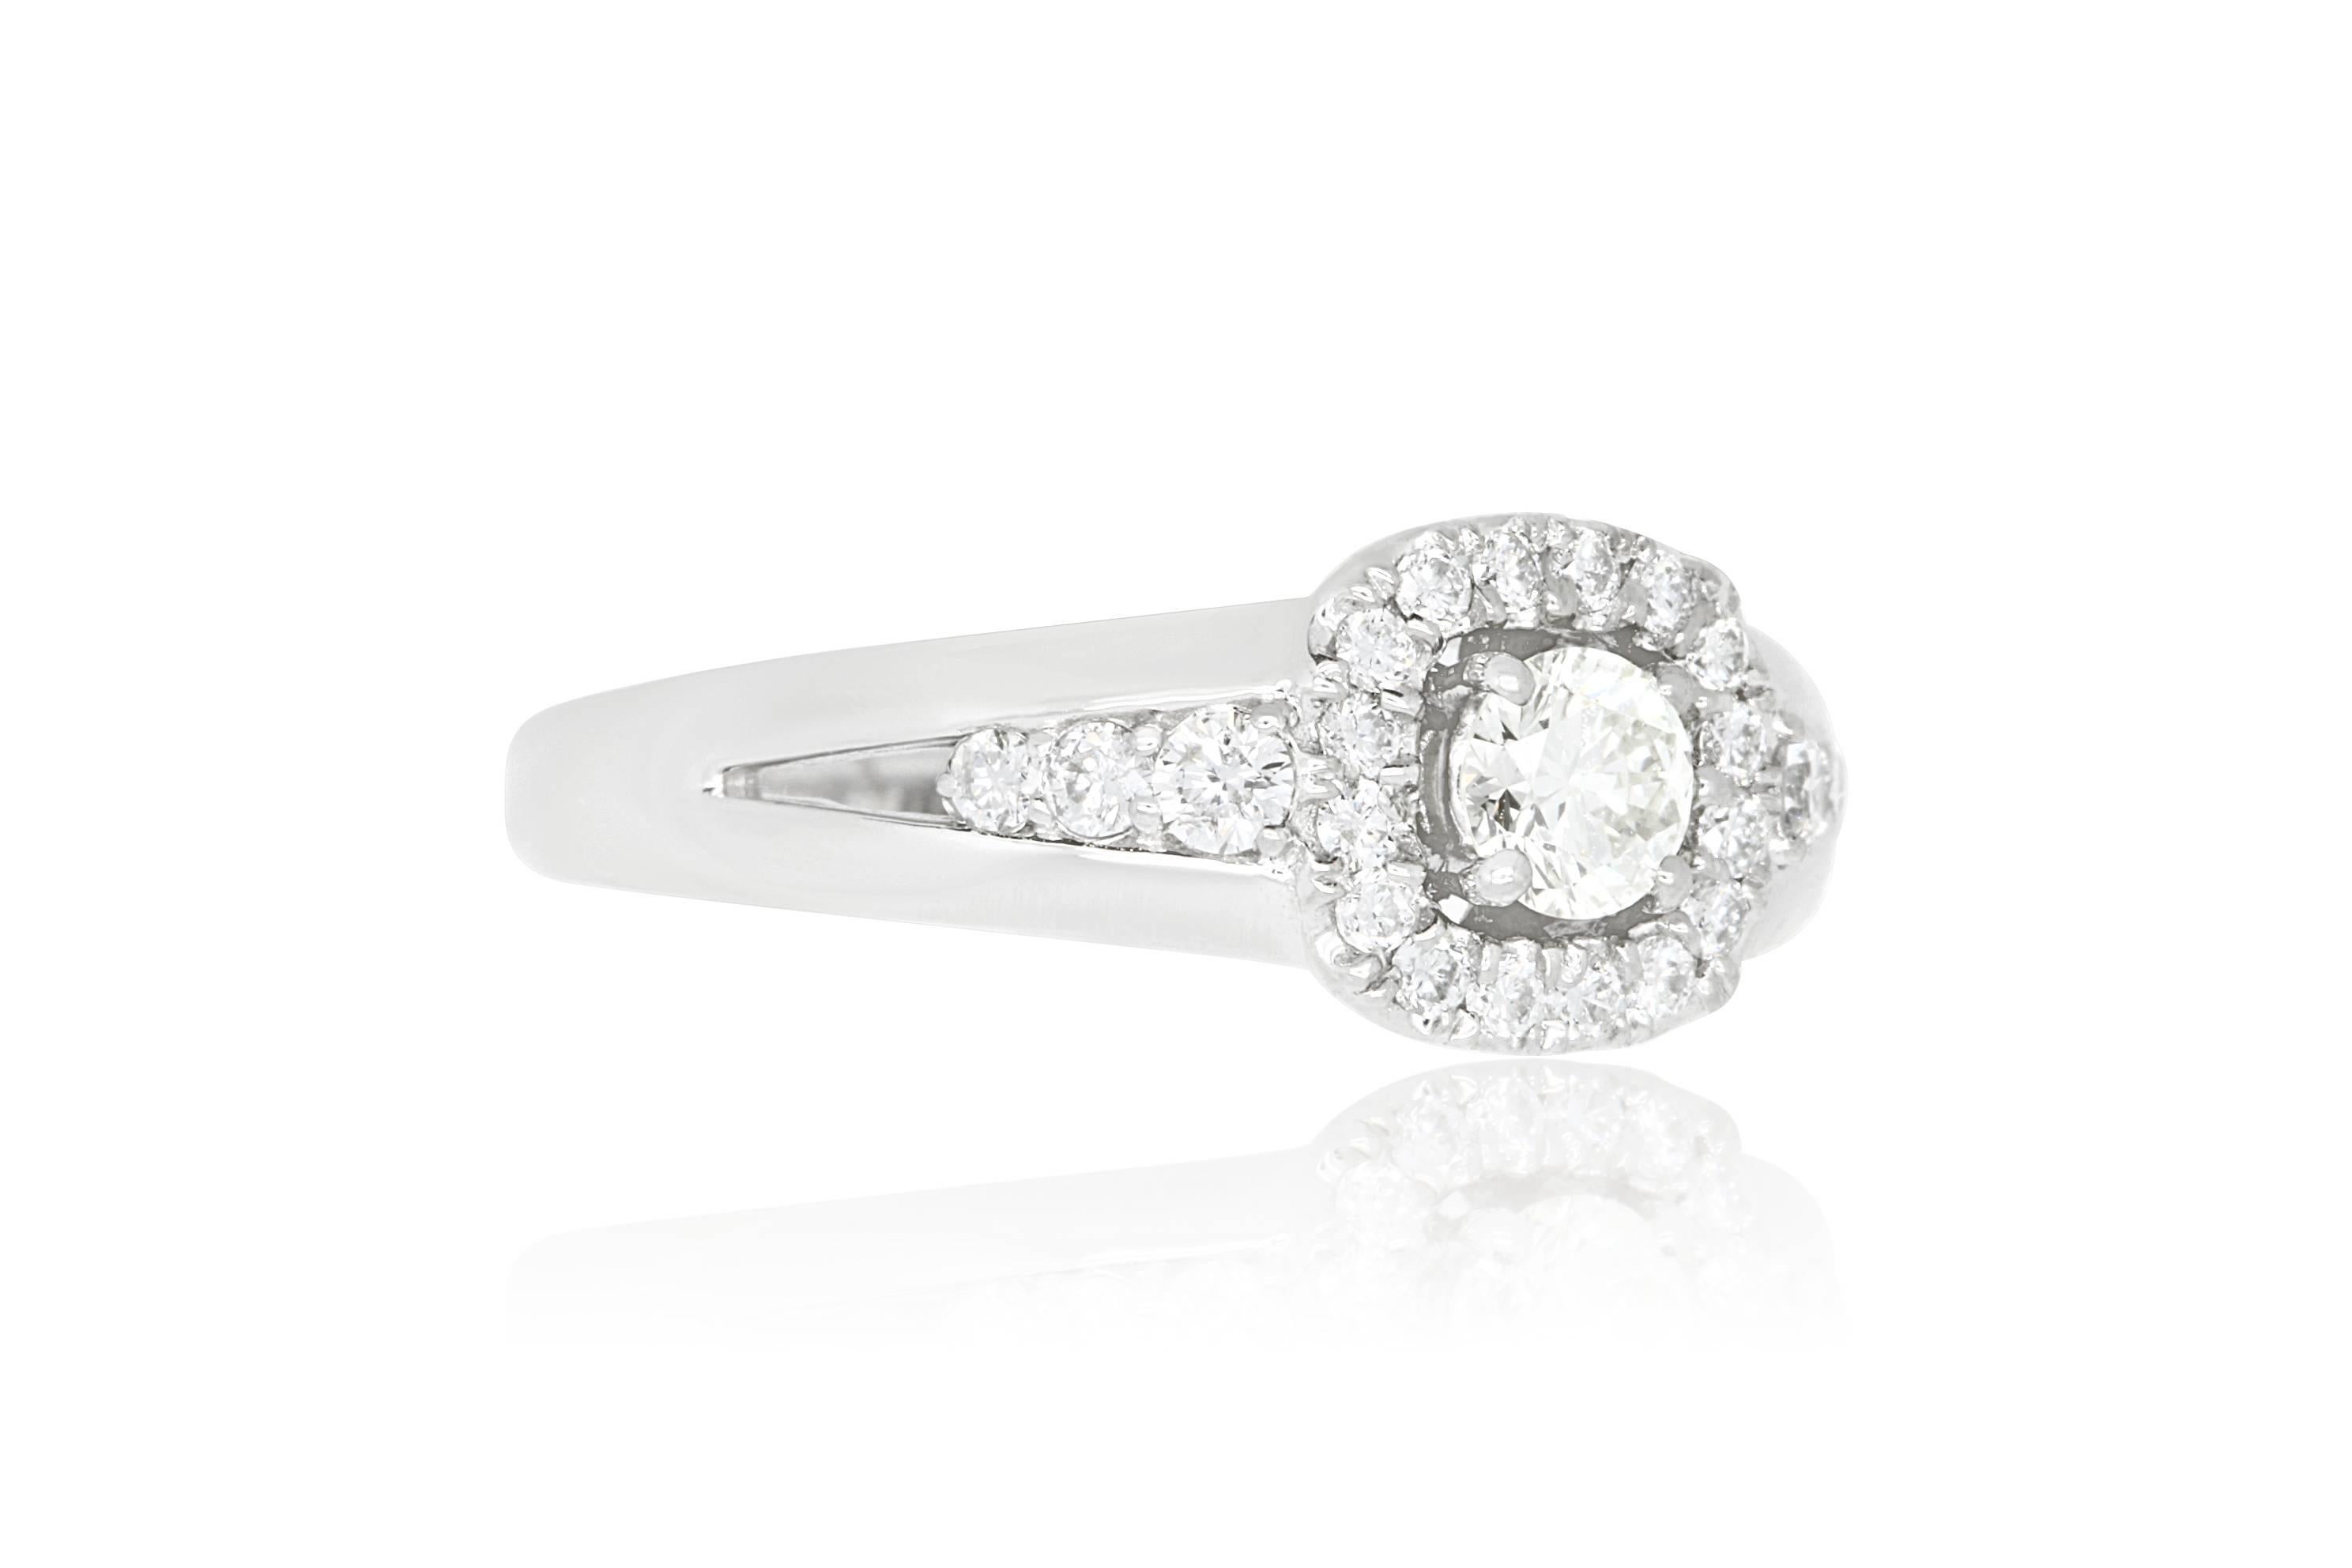 Material: 14k White Gold 
Center Stone Details: 0.30 Carat White Diamond - Clarity: VS  / Color: J
Stone Details: 20 White Diamonds at 0.33 Carats -  Clarity: SI  / Color: H-I
Ring Size: Size 7. Alberto offers complimentary sizing on all